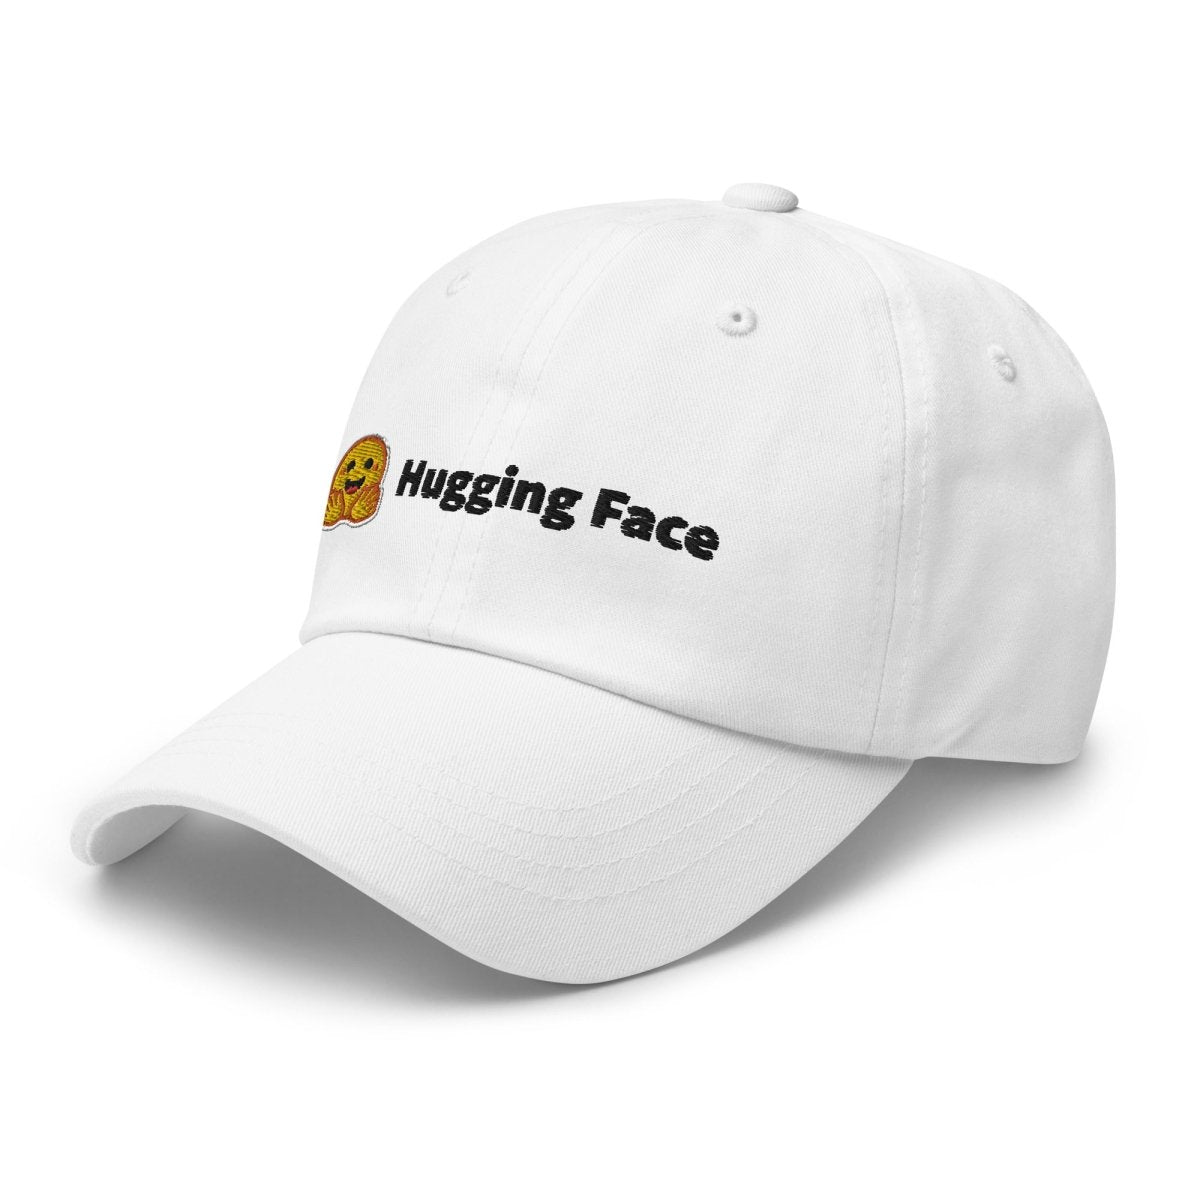 Hugging Face Black Logo Embroidered Cap - White - AI Store